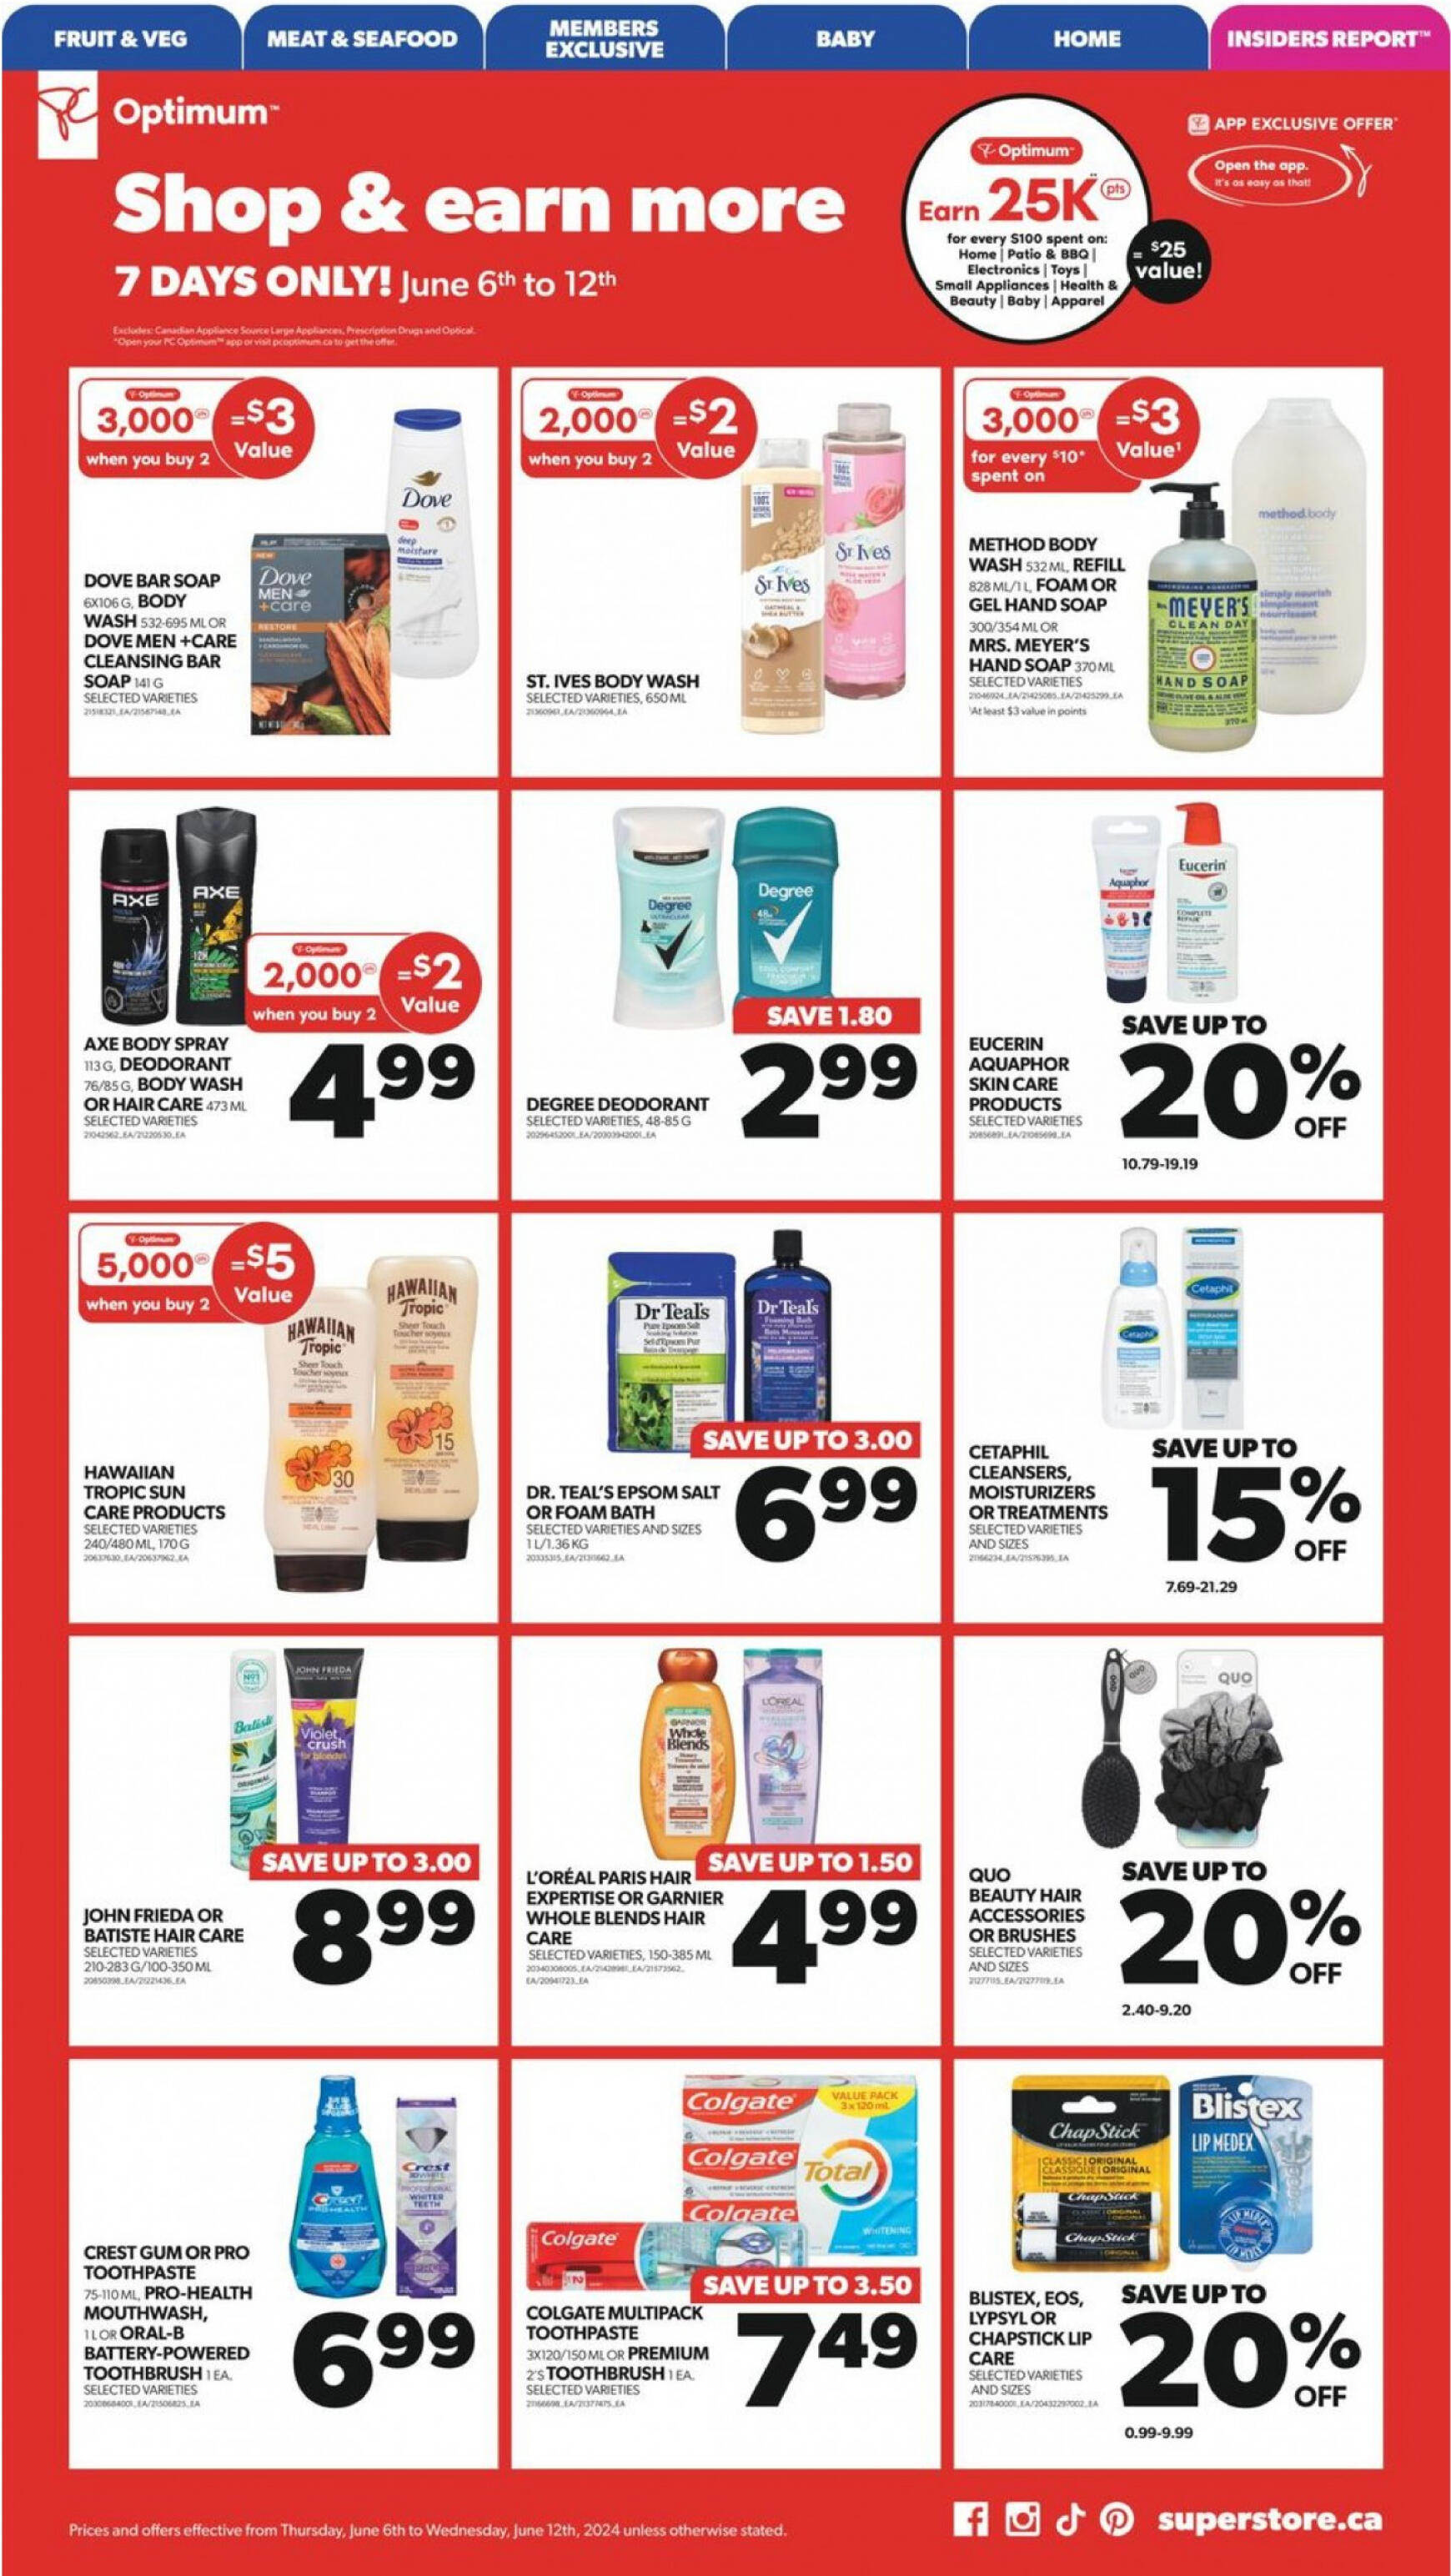 real-canadian-superstore - Real Canadian Superstore flyer current 06.06. - 12.06. - page: 21